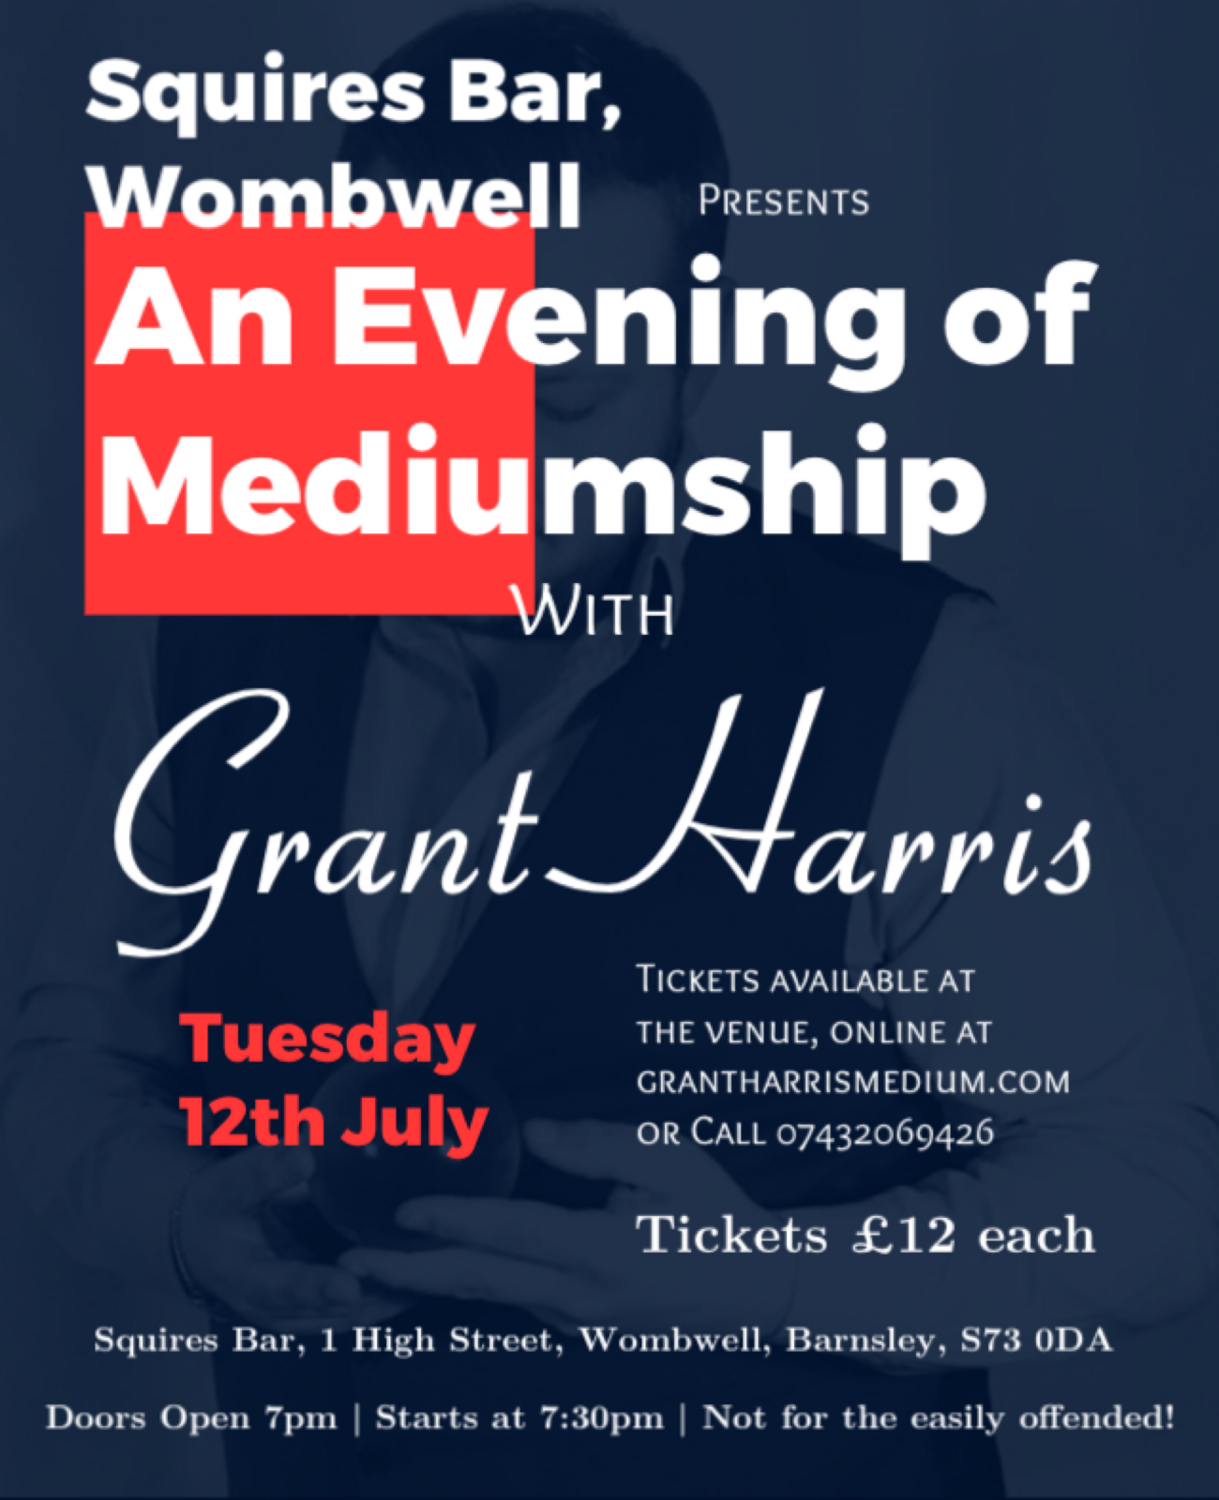 Evening of Mediumship, Squires Bar, Wombwell, Tue 12th July 2022